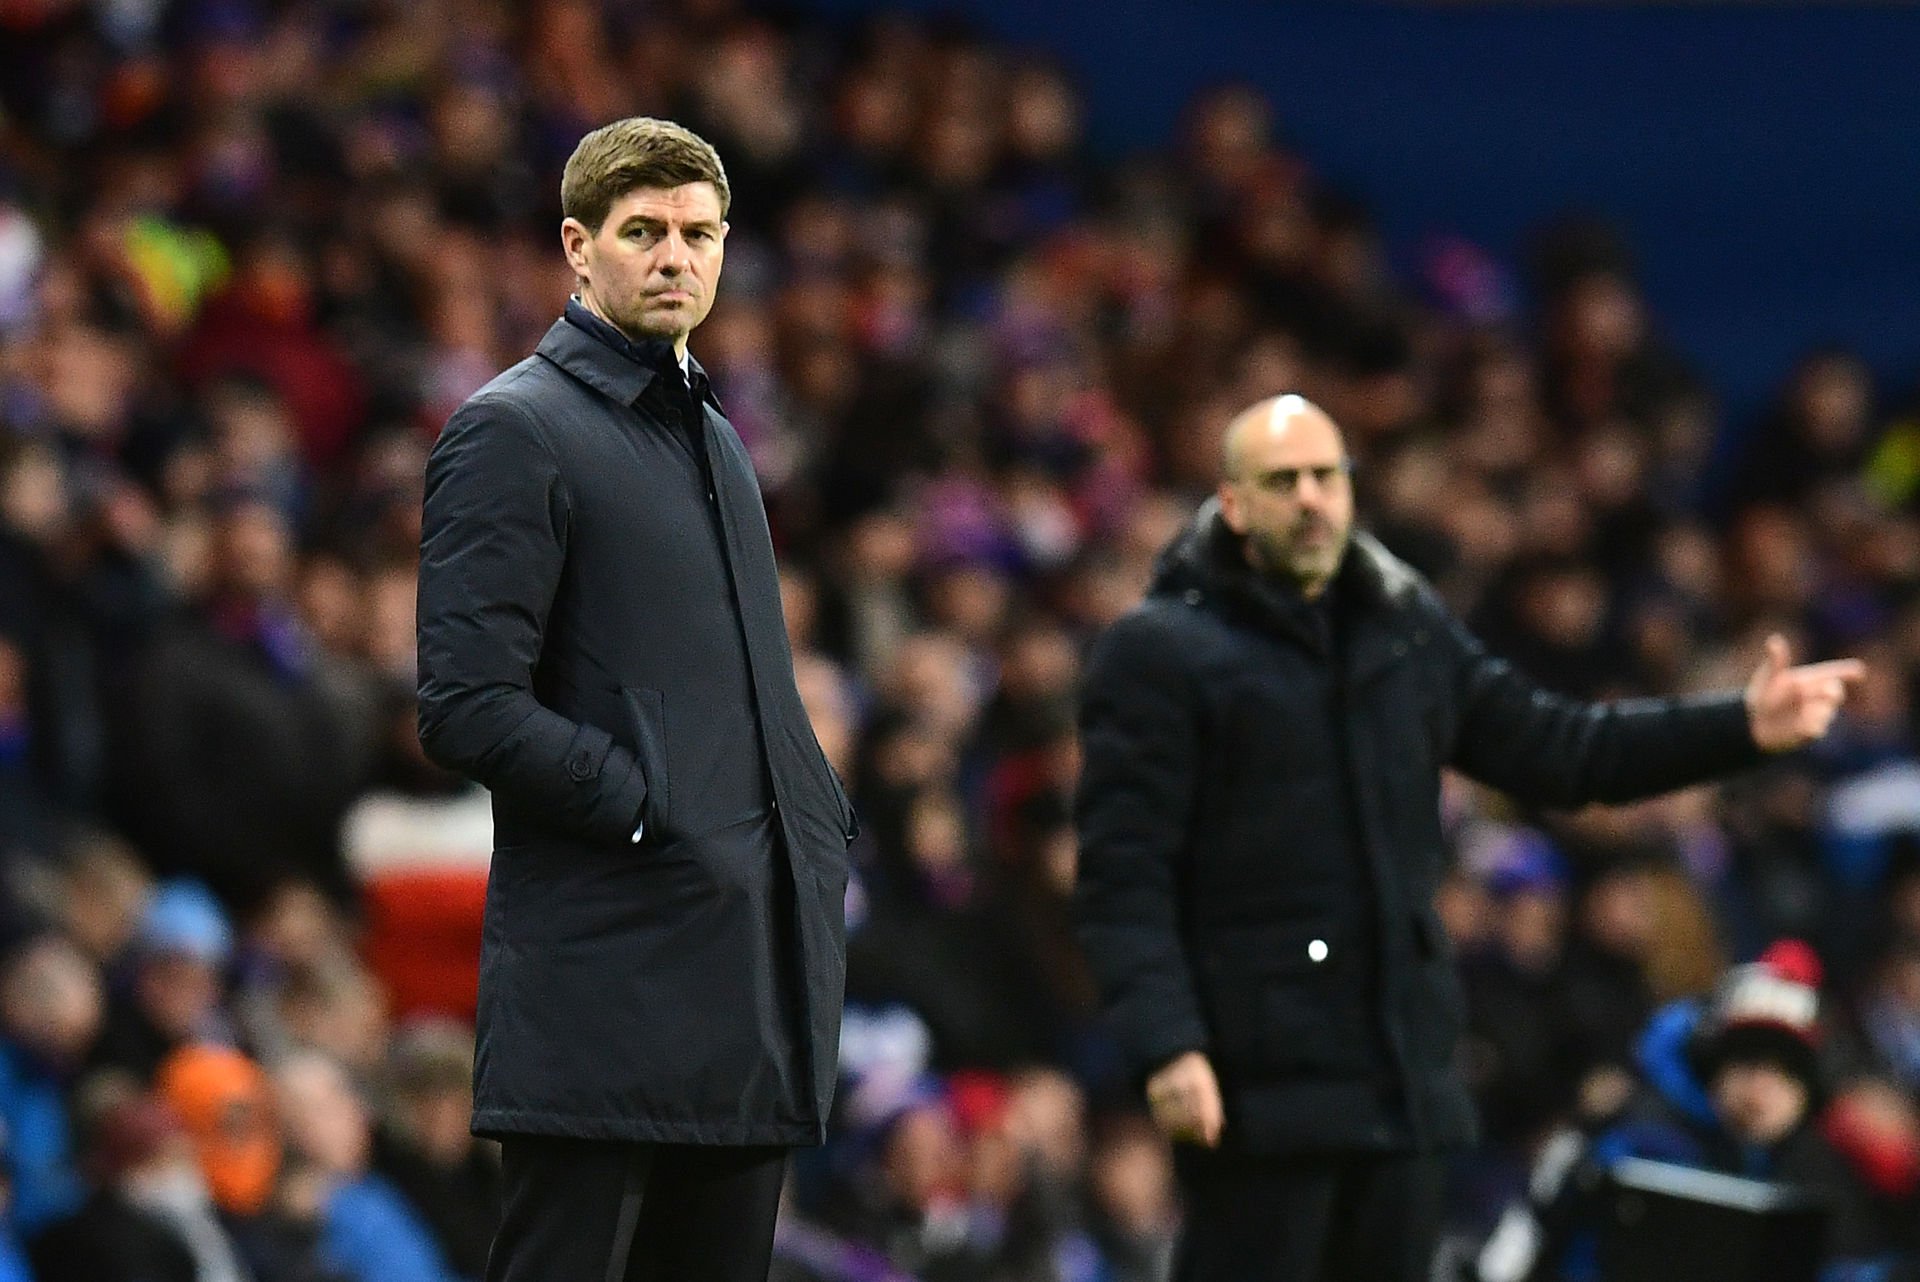 steven_gerrard_manager_of_rangers_fc_looks_on_during_the_uefa_eu_1520758